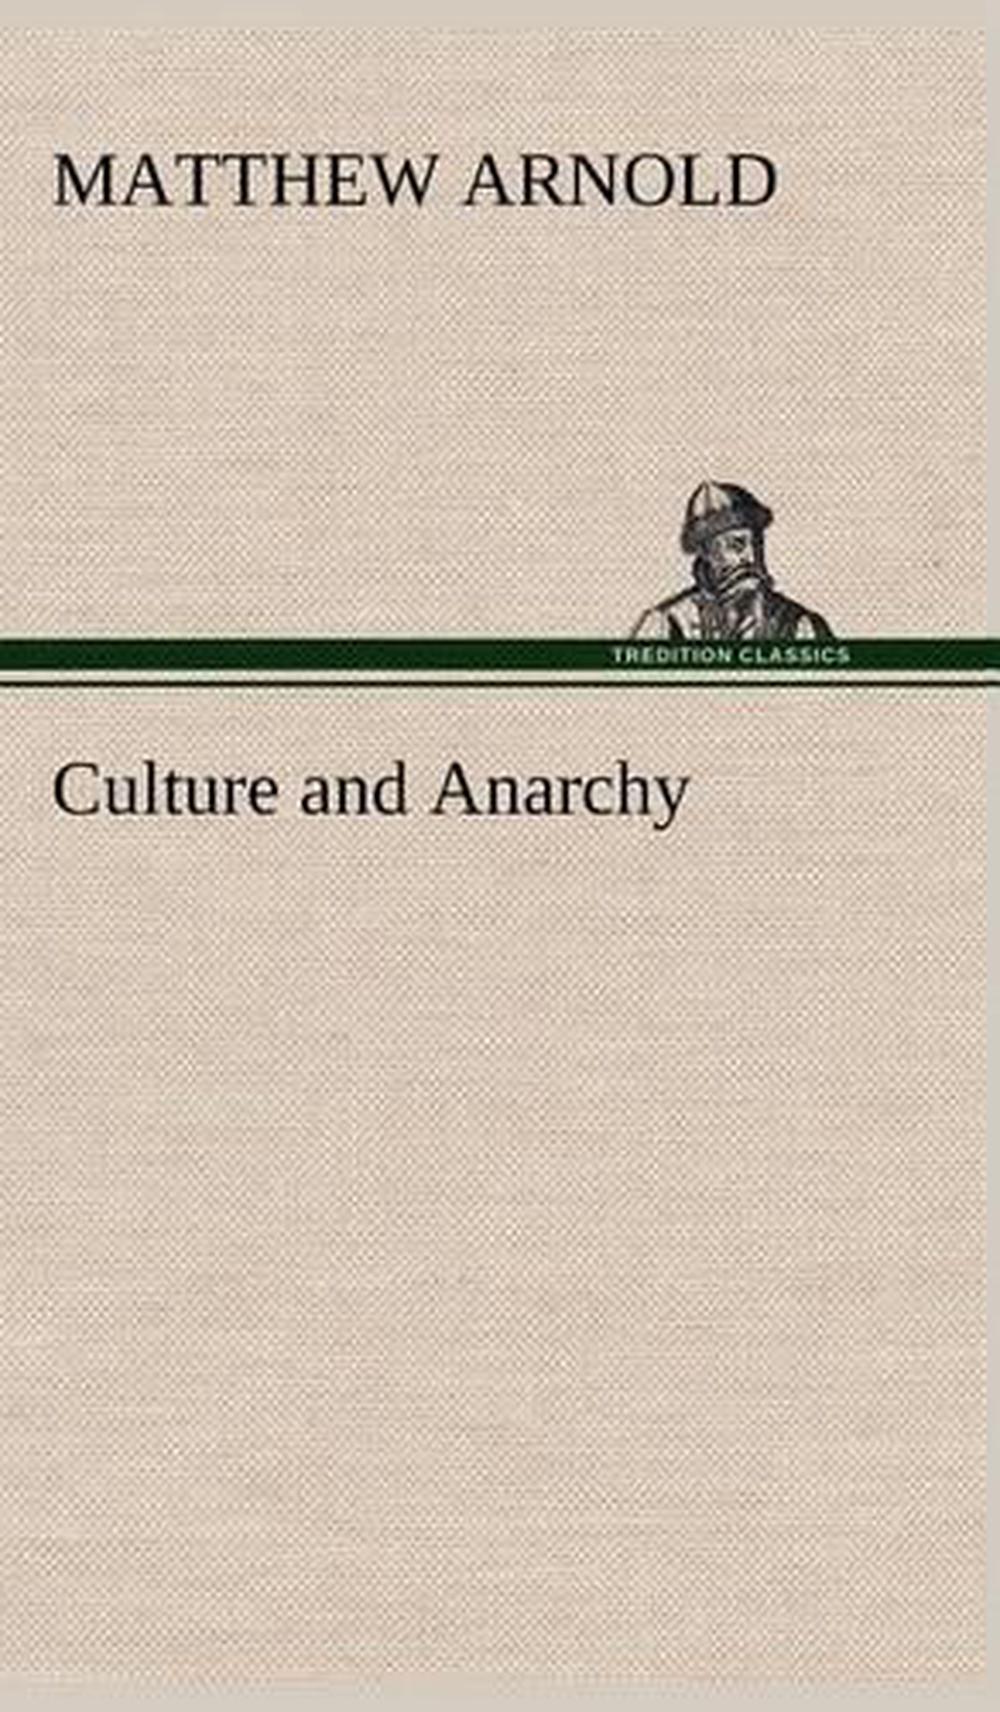 matthew arnold culture and anarchy analysis